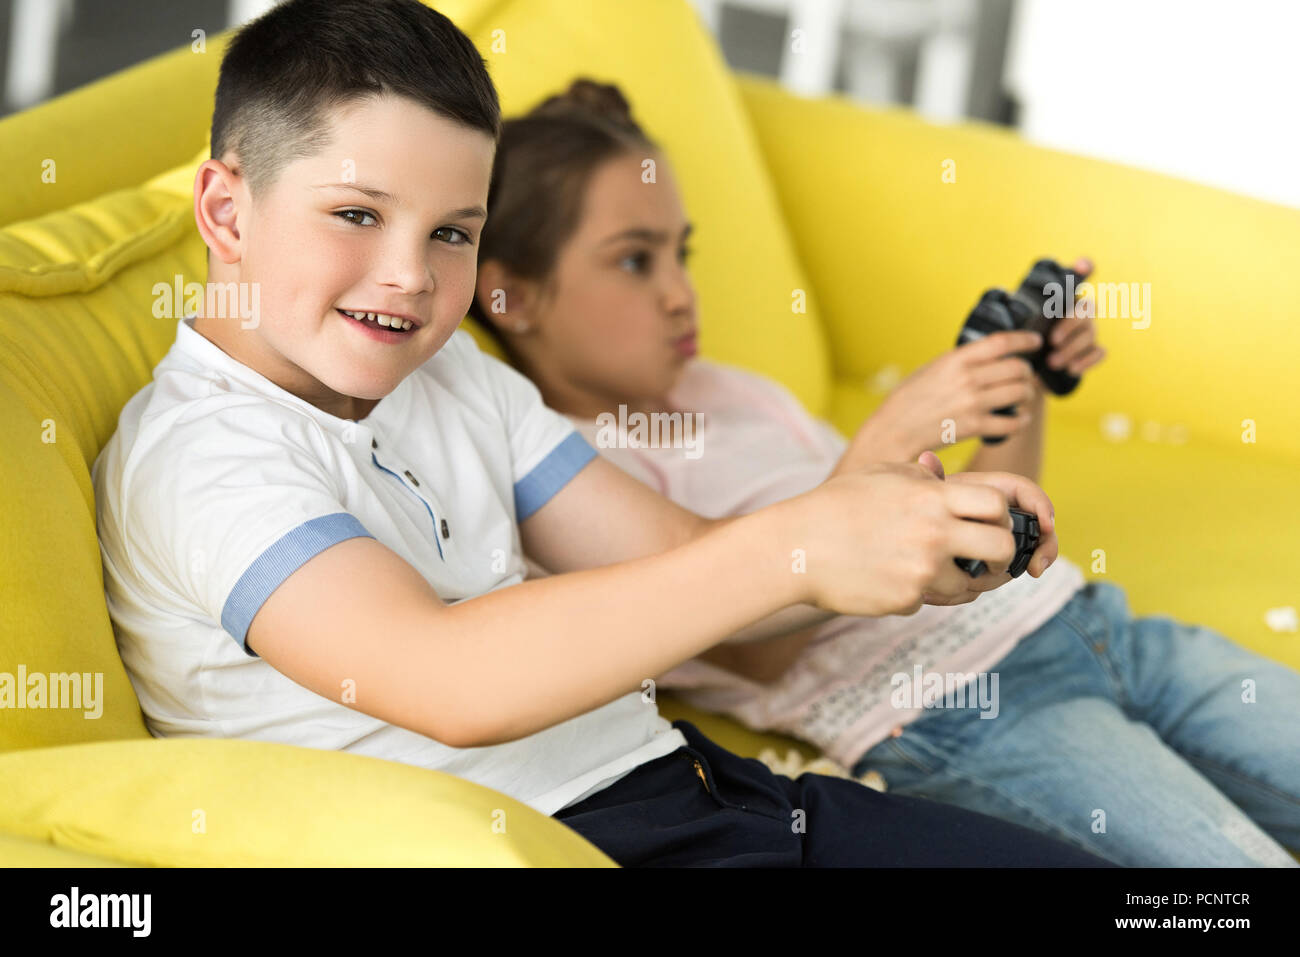 sister and brother playing video game on sofa at home Stock Photo